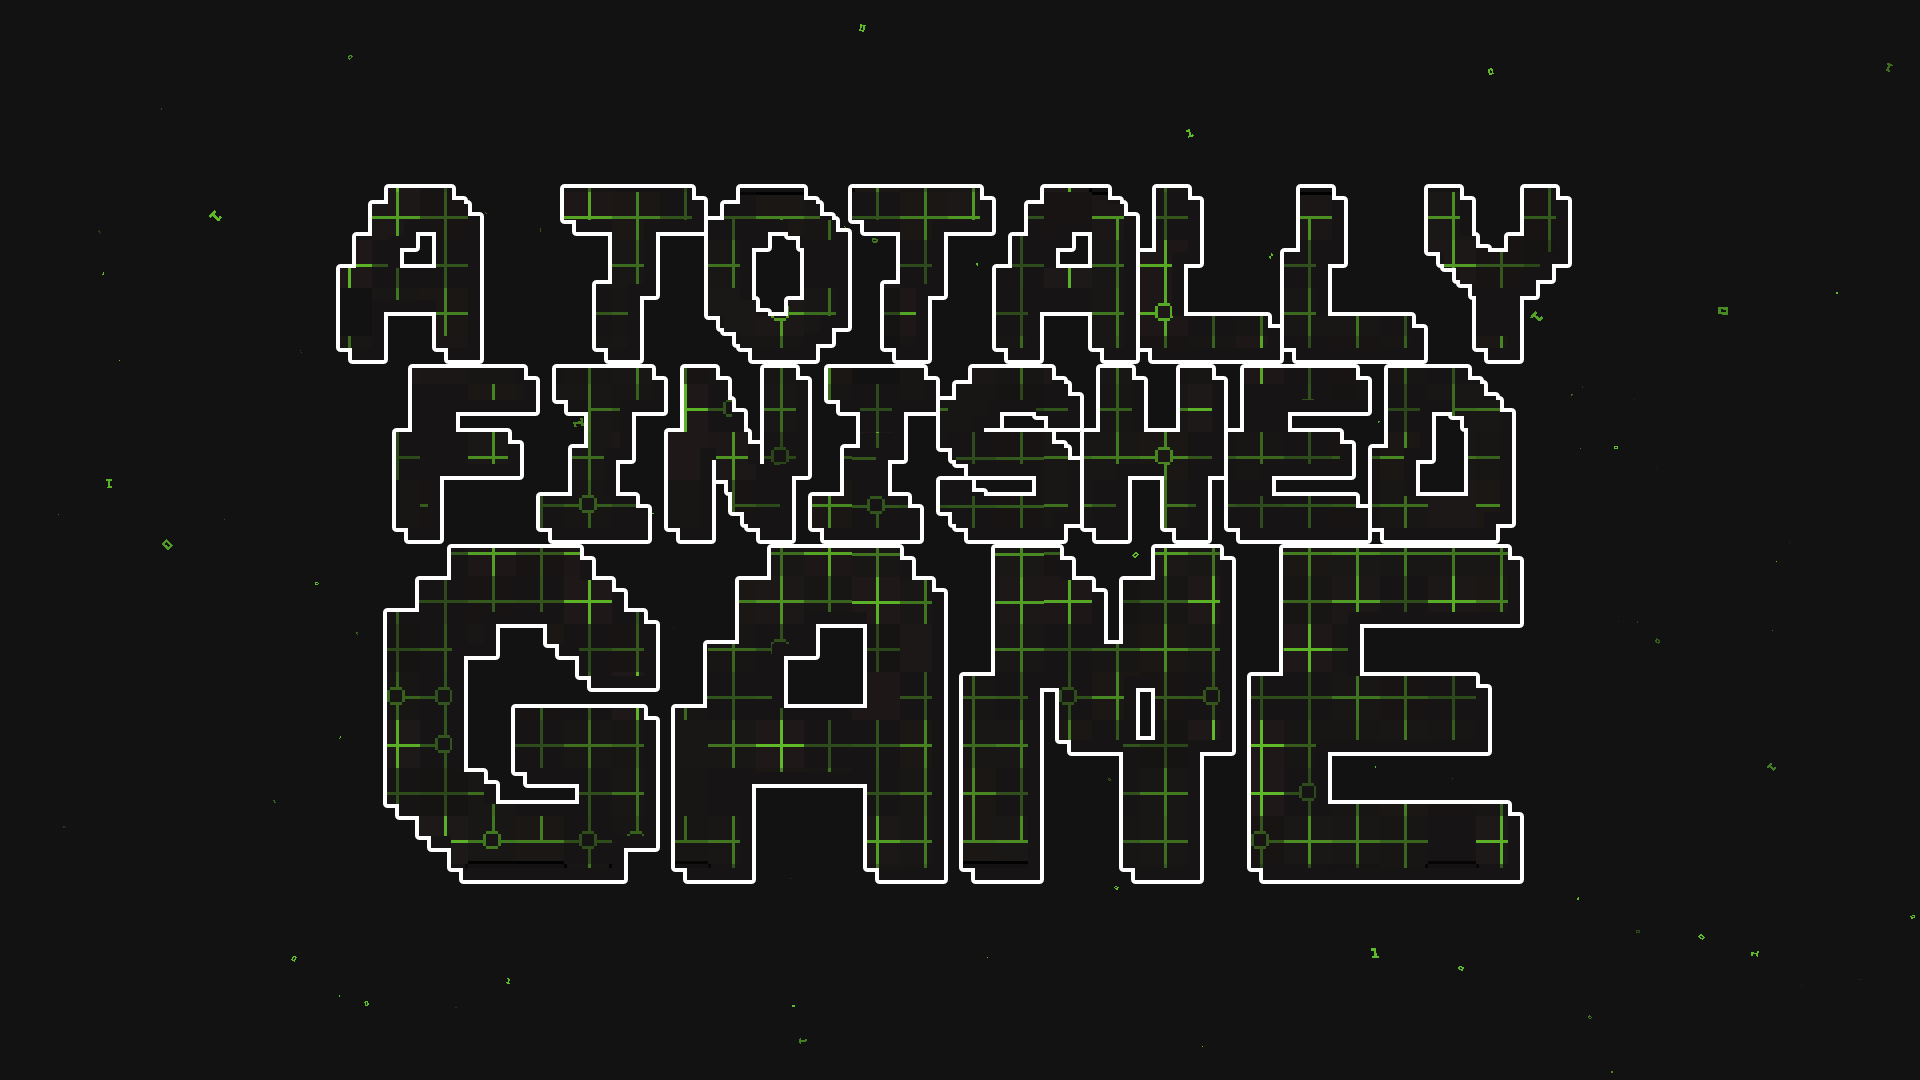 A TOTALLY FINISHED GAME!